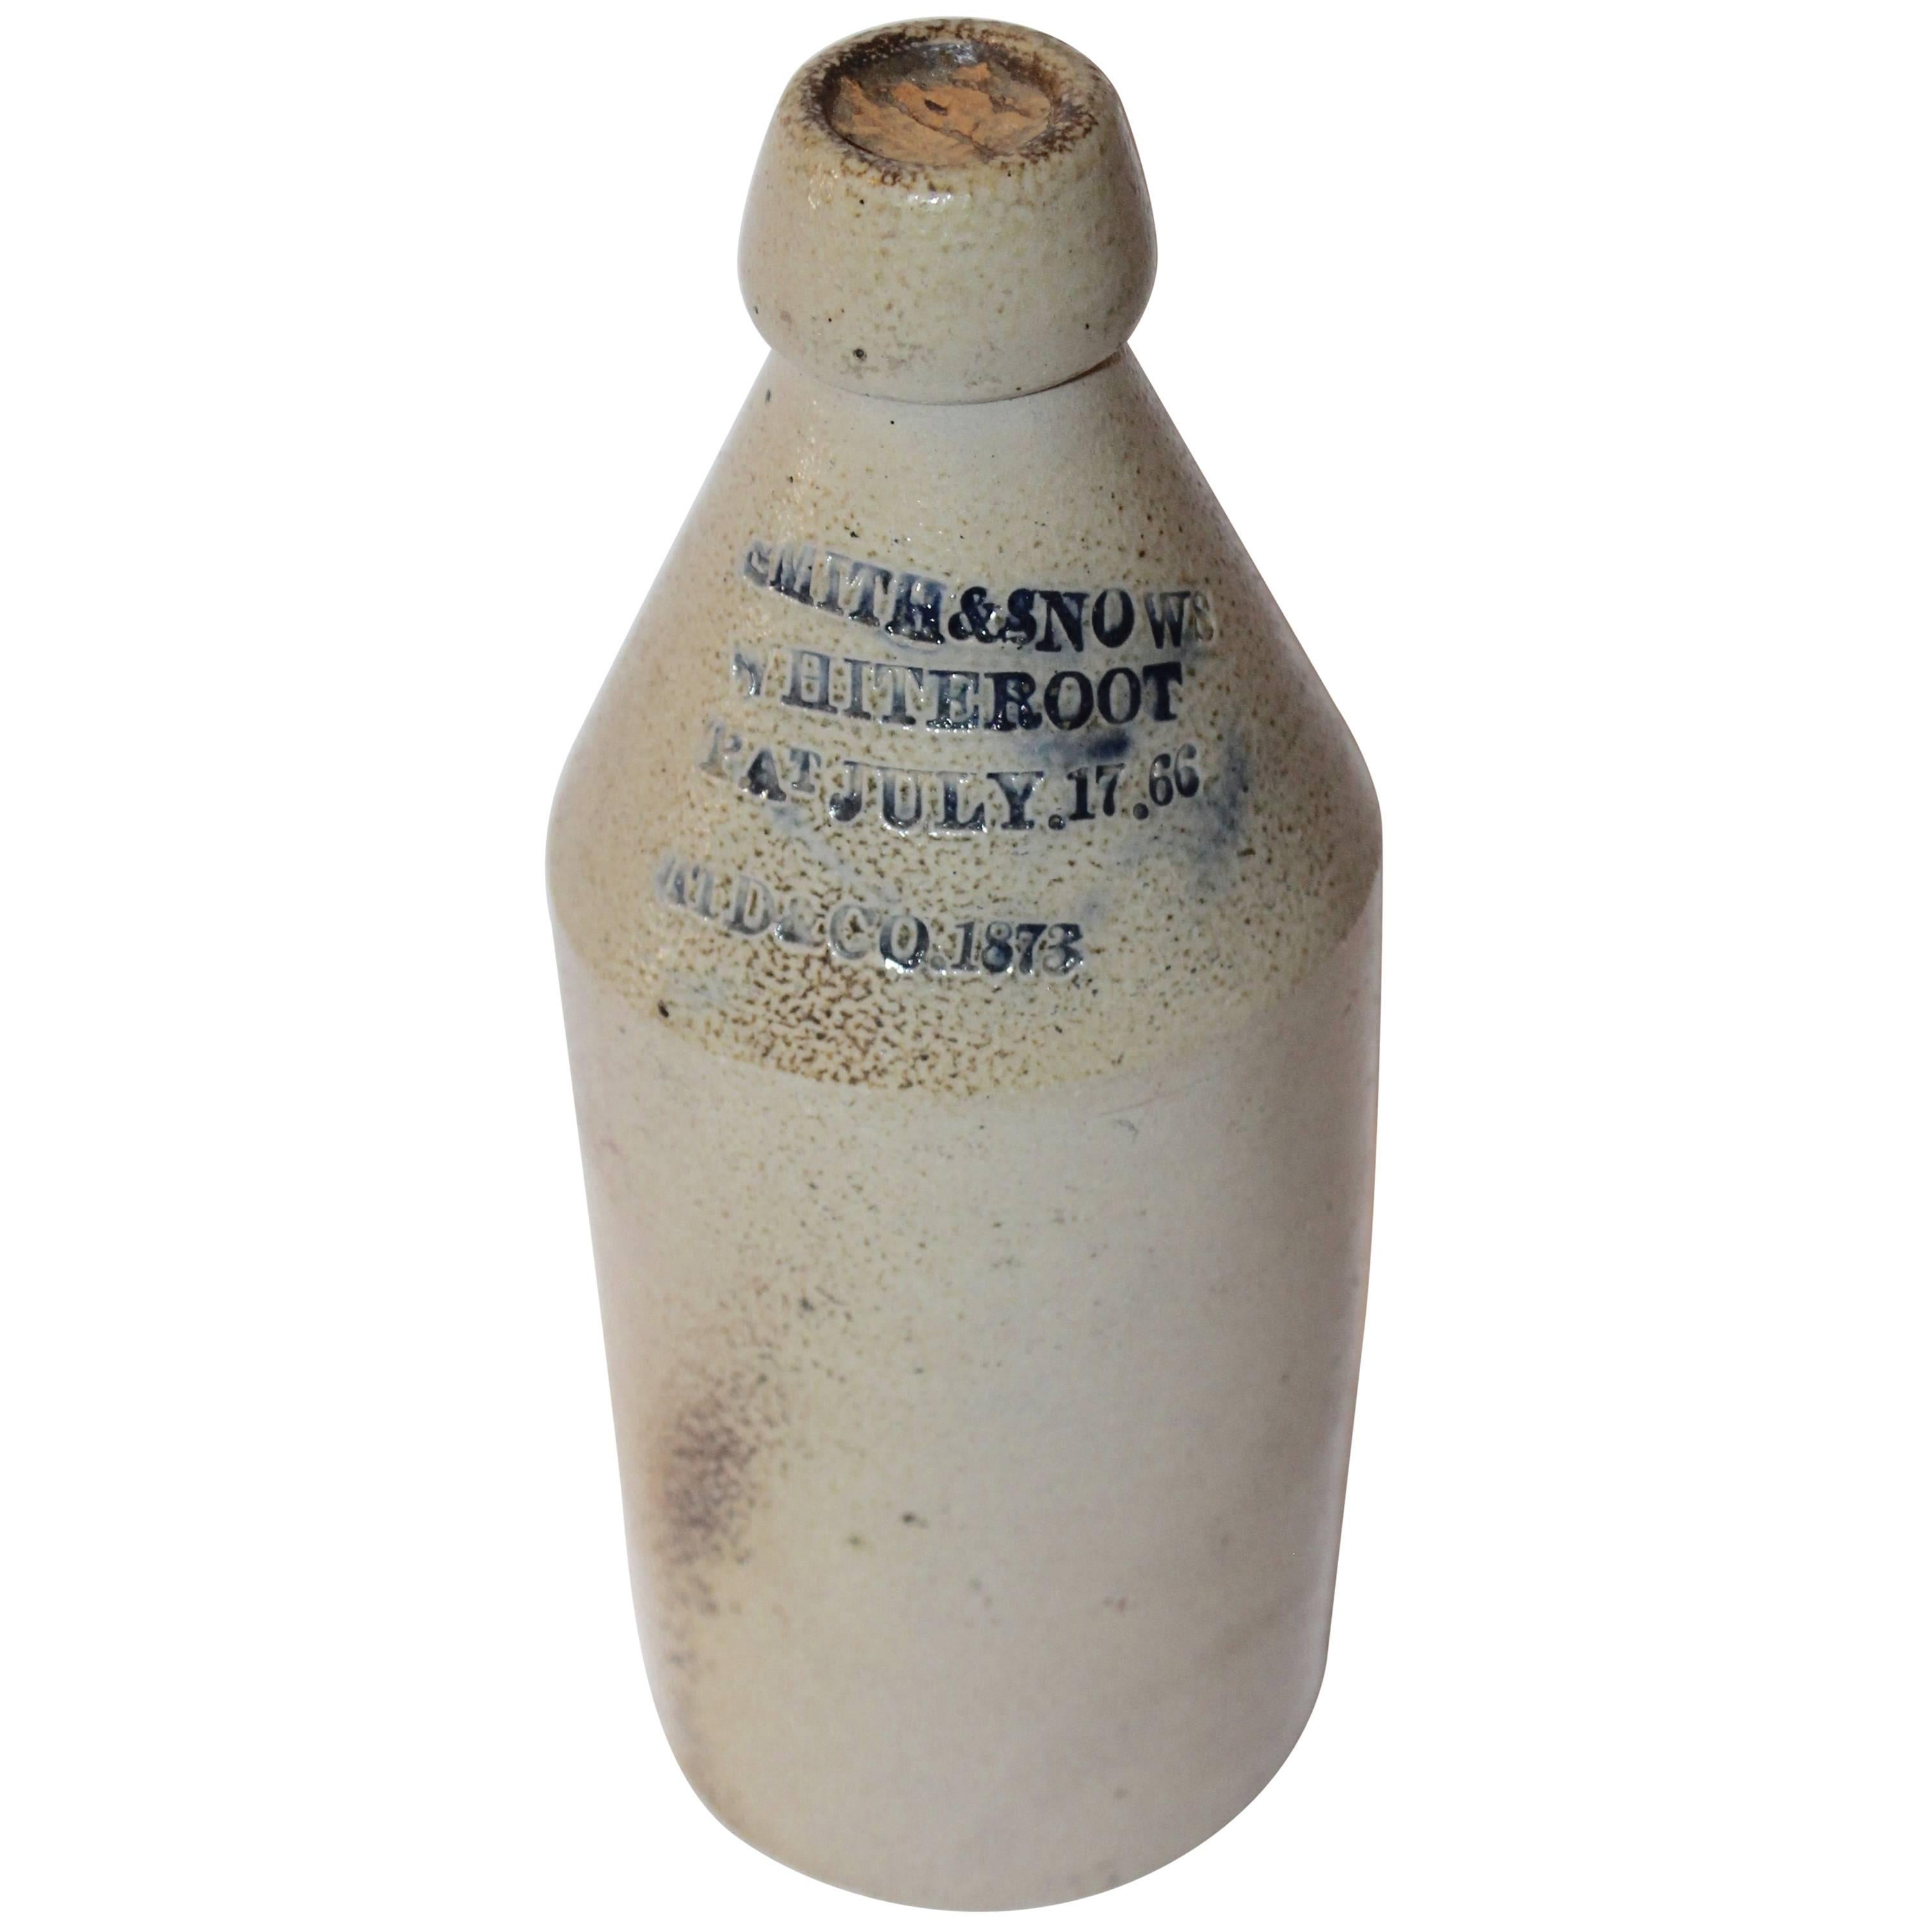 19th Century Smith & Snows Whiteroot Pottery Bitters Bottle, Dated 1873 For Sale